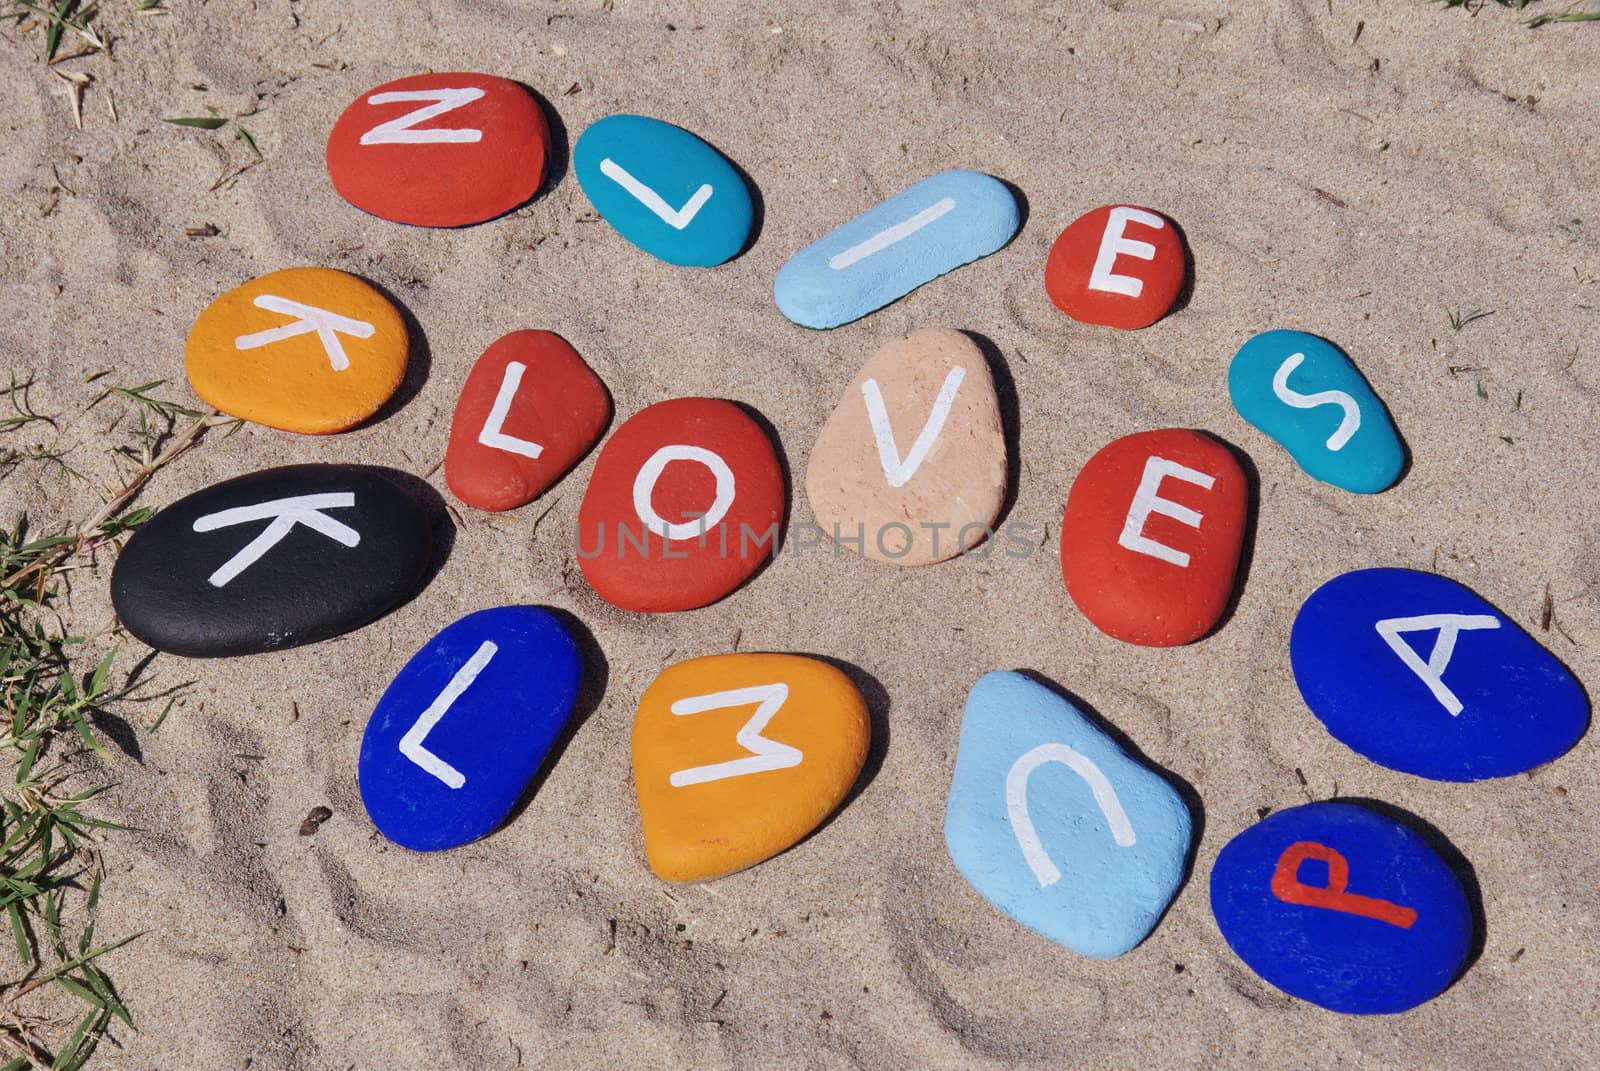 Conceptual stone game of love among colourful stones with sand background